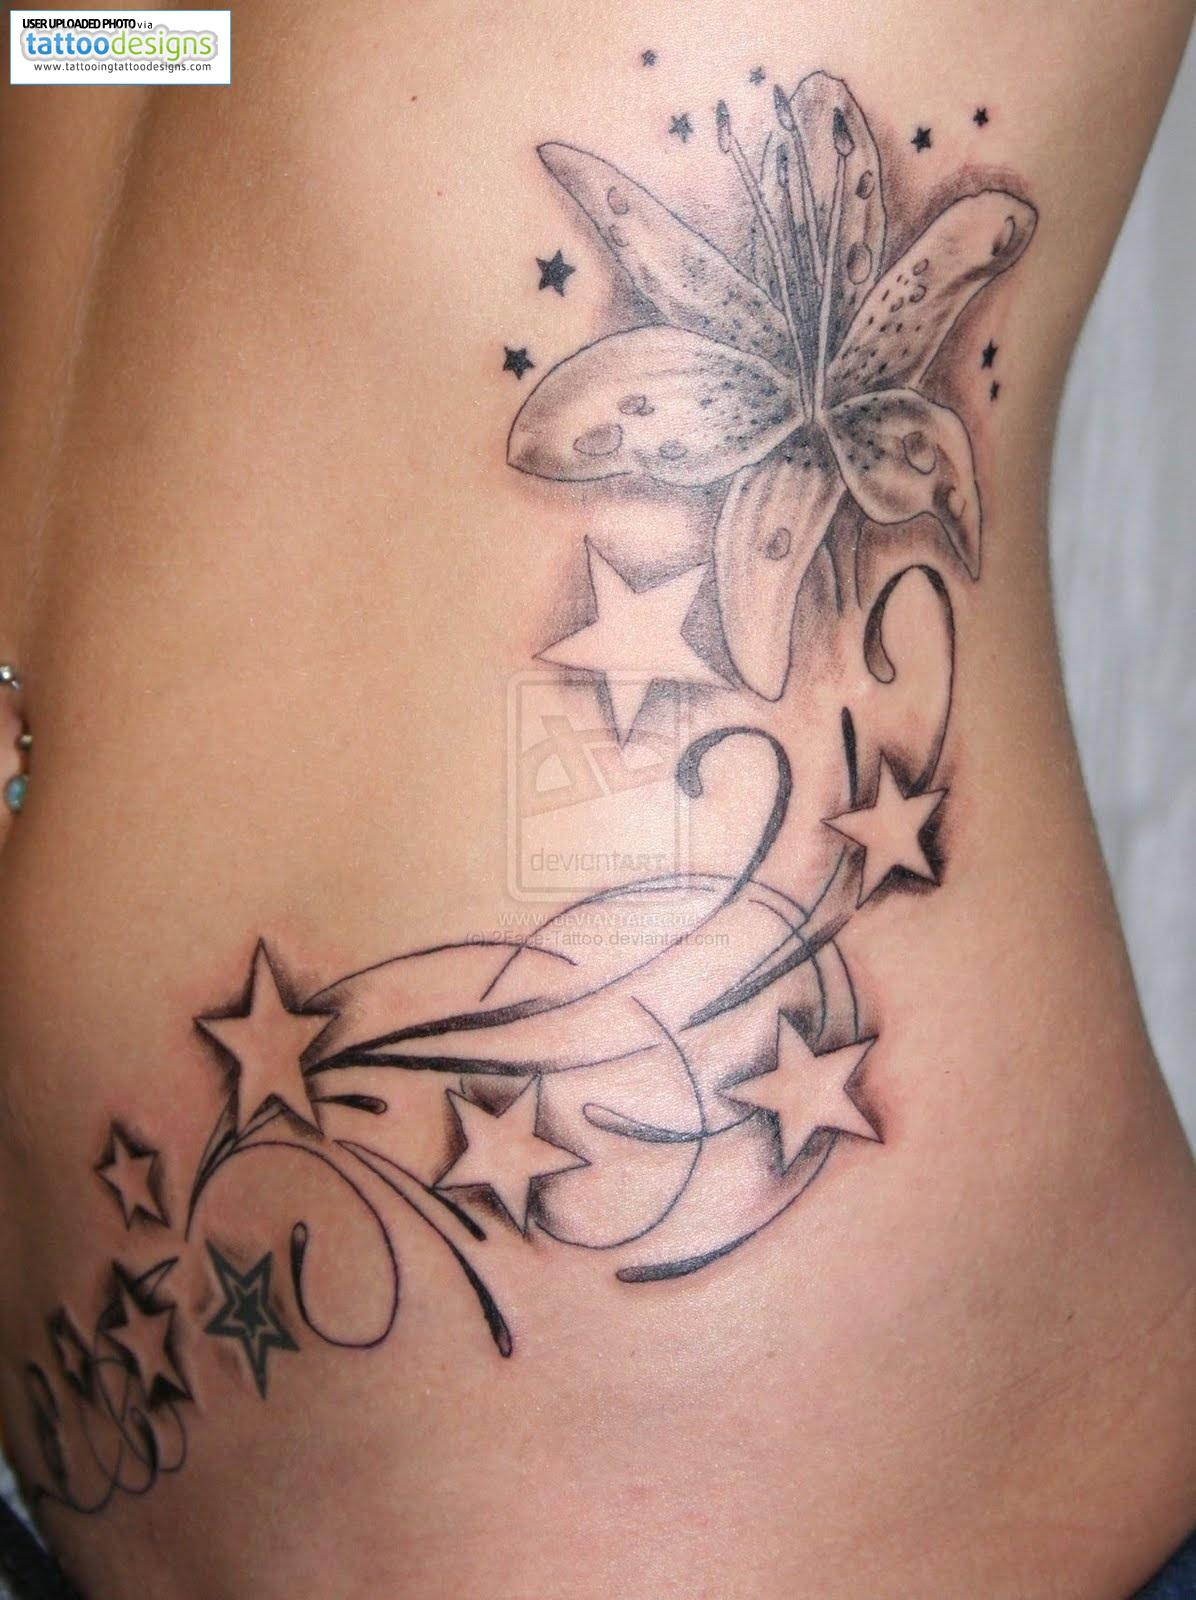 Flower Star And Butterfly Tattoo Designs Favorite Girl Tattoos Of pertaining to dimensions 1196 X 1600